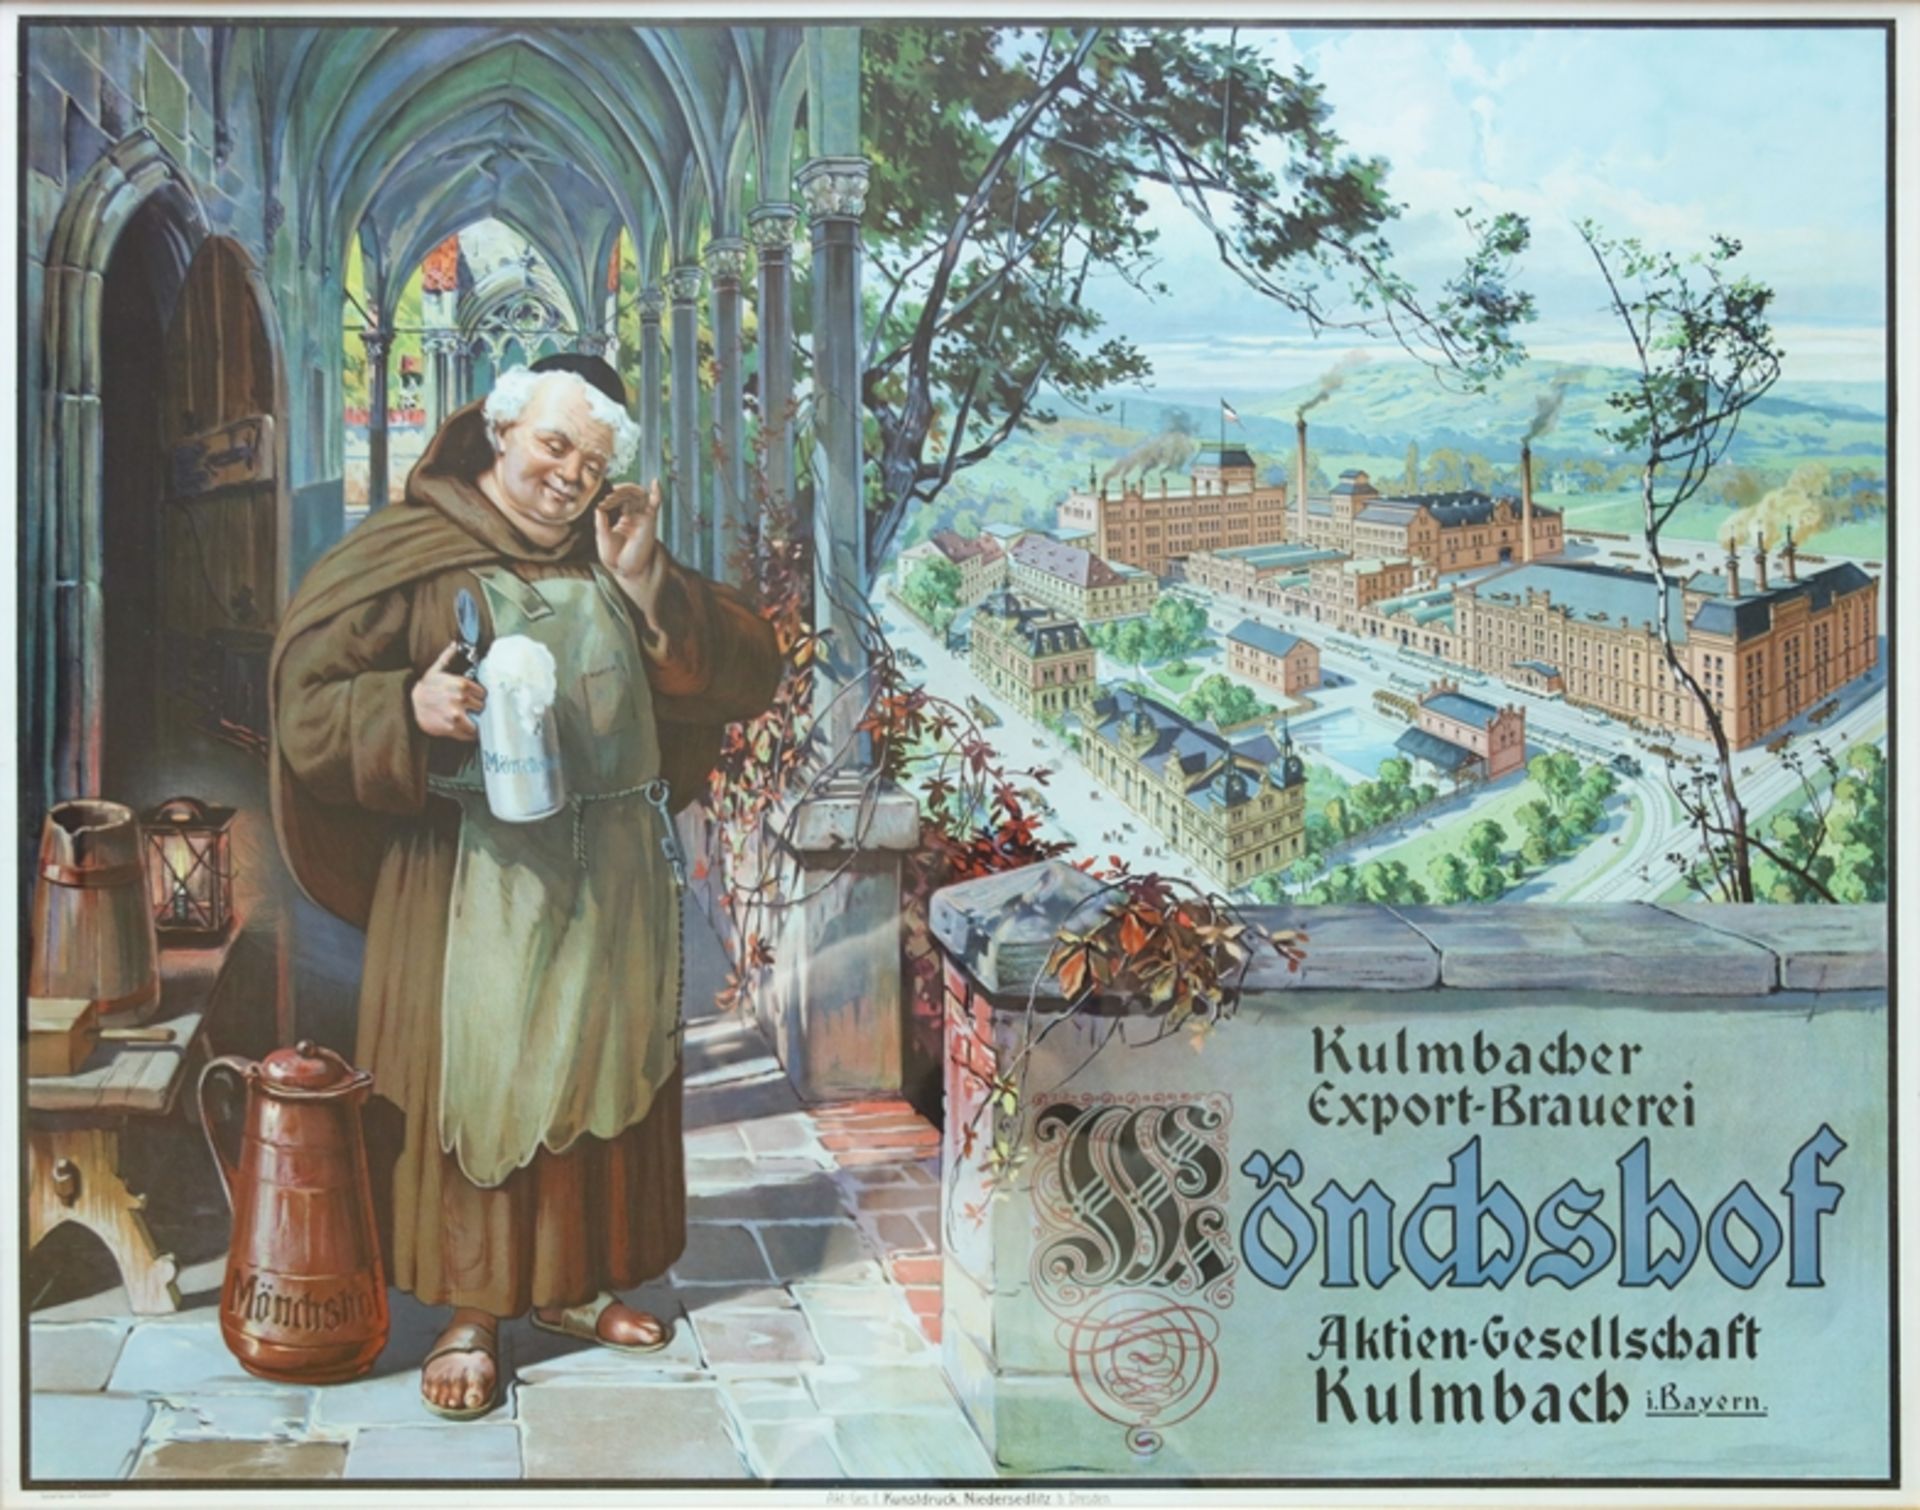 Poster view of the Mönchshof brewery in Kulmbach, around 1910 - Image 3 of 3